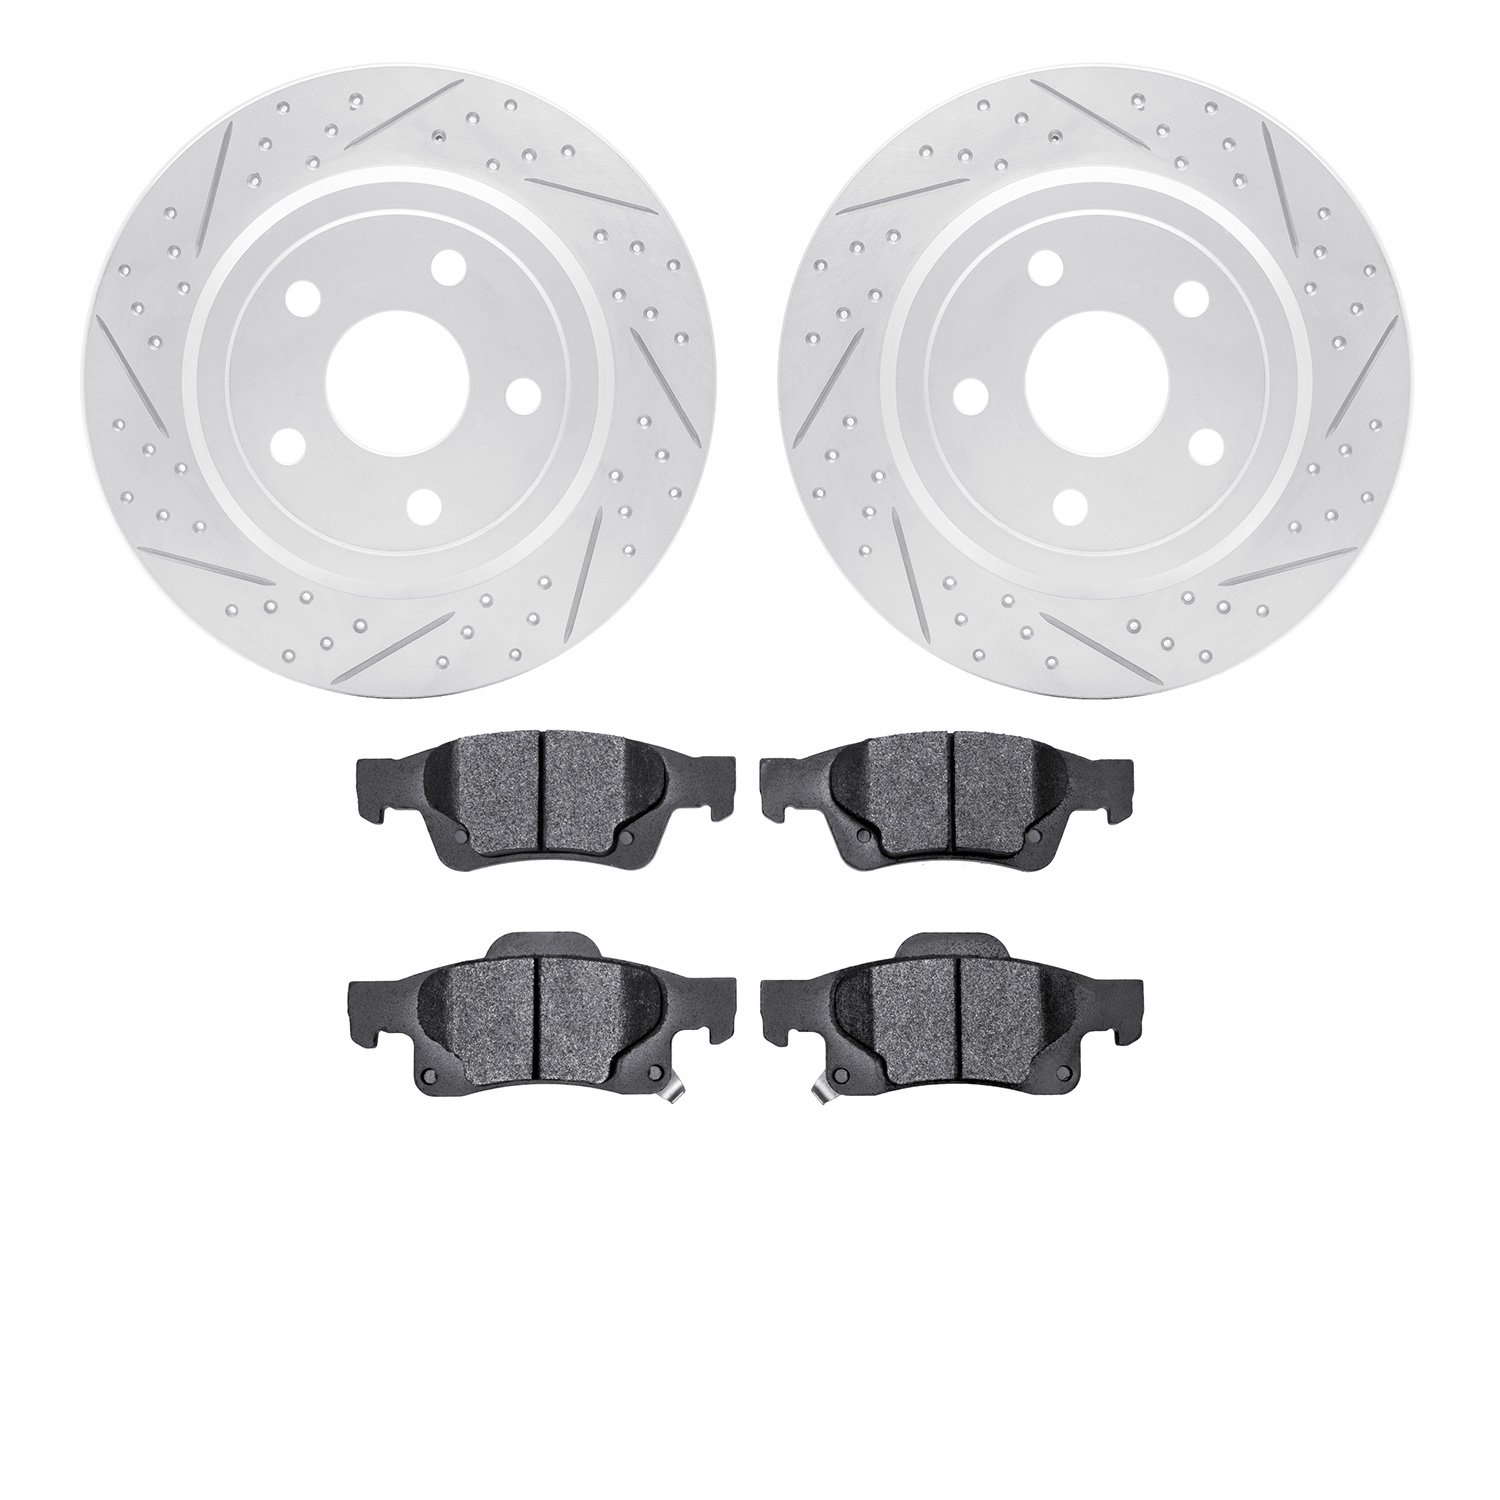 2502-42037 Geoperformance Drilled/Slotted Rotors w/5000 Advanced Brake Pads Kit, Fits Select Mopar, Position: Rear